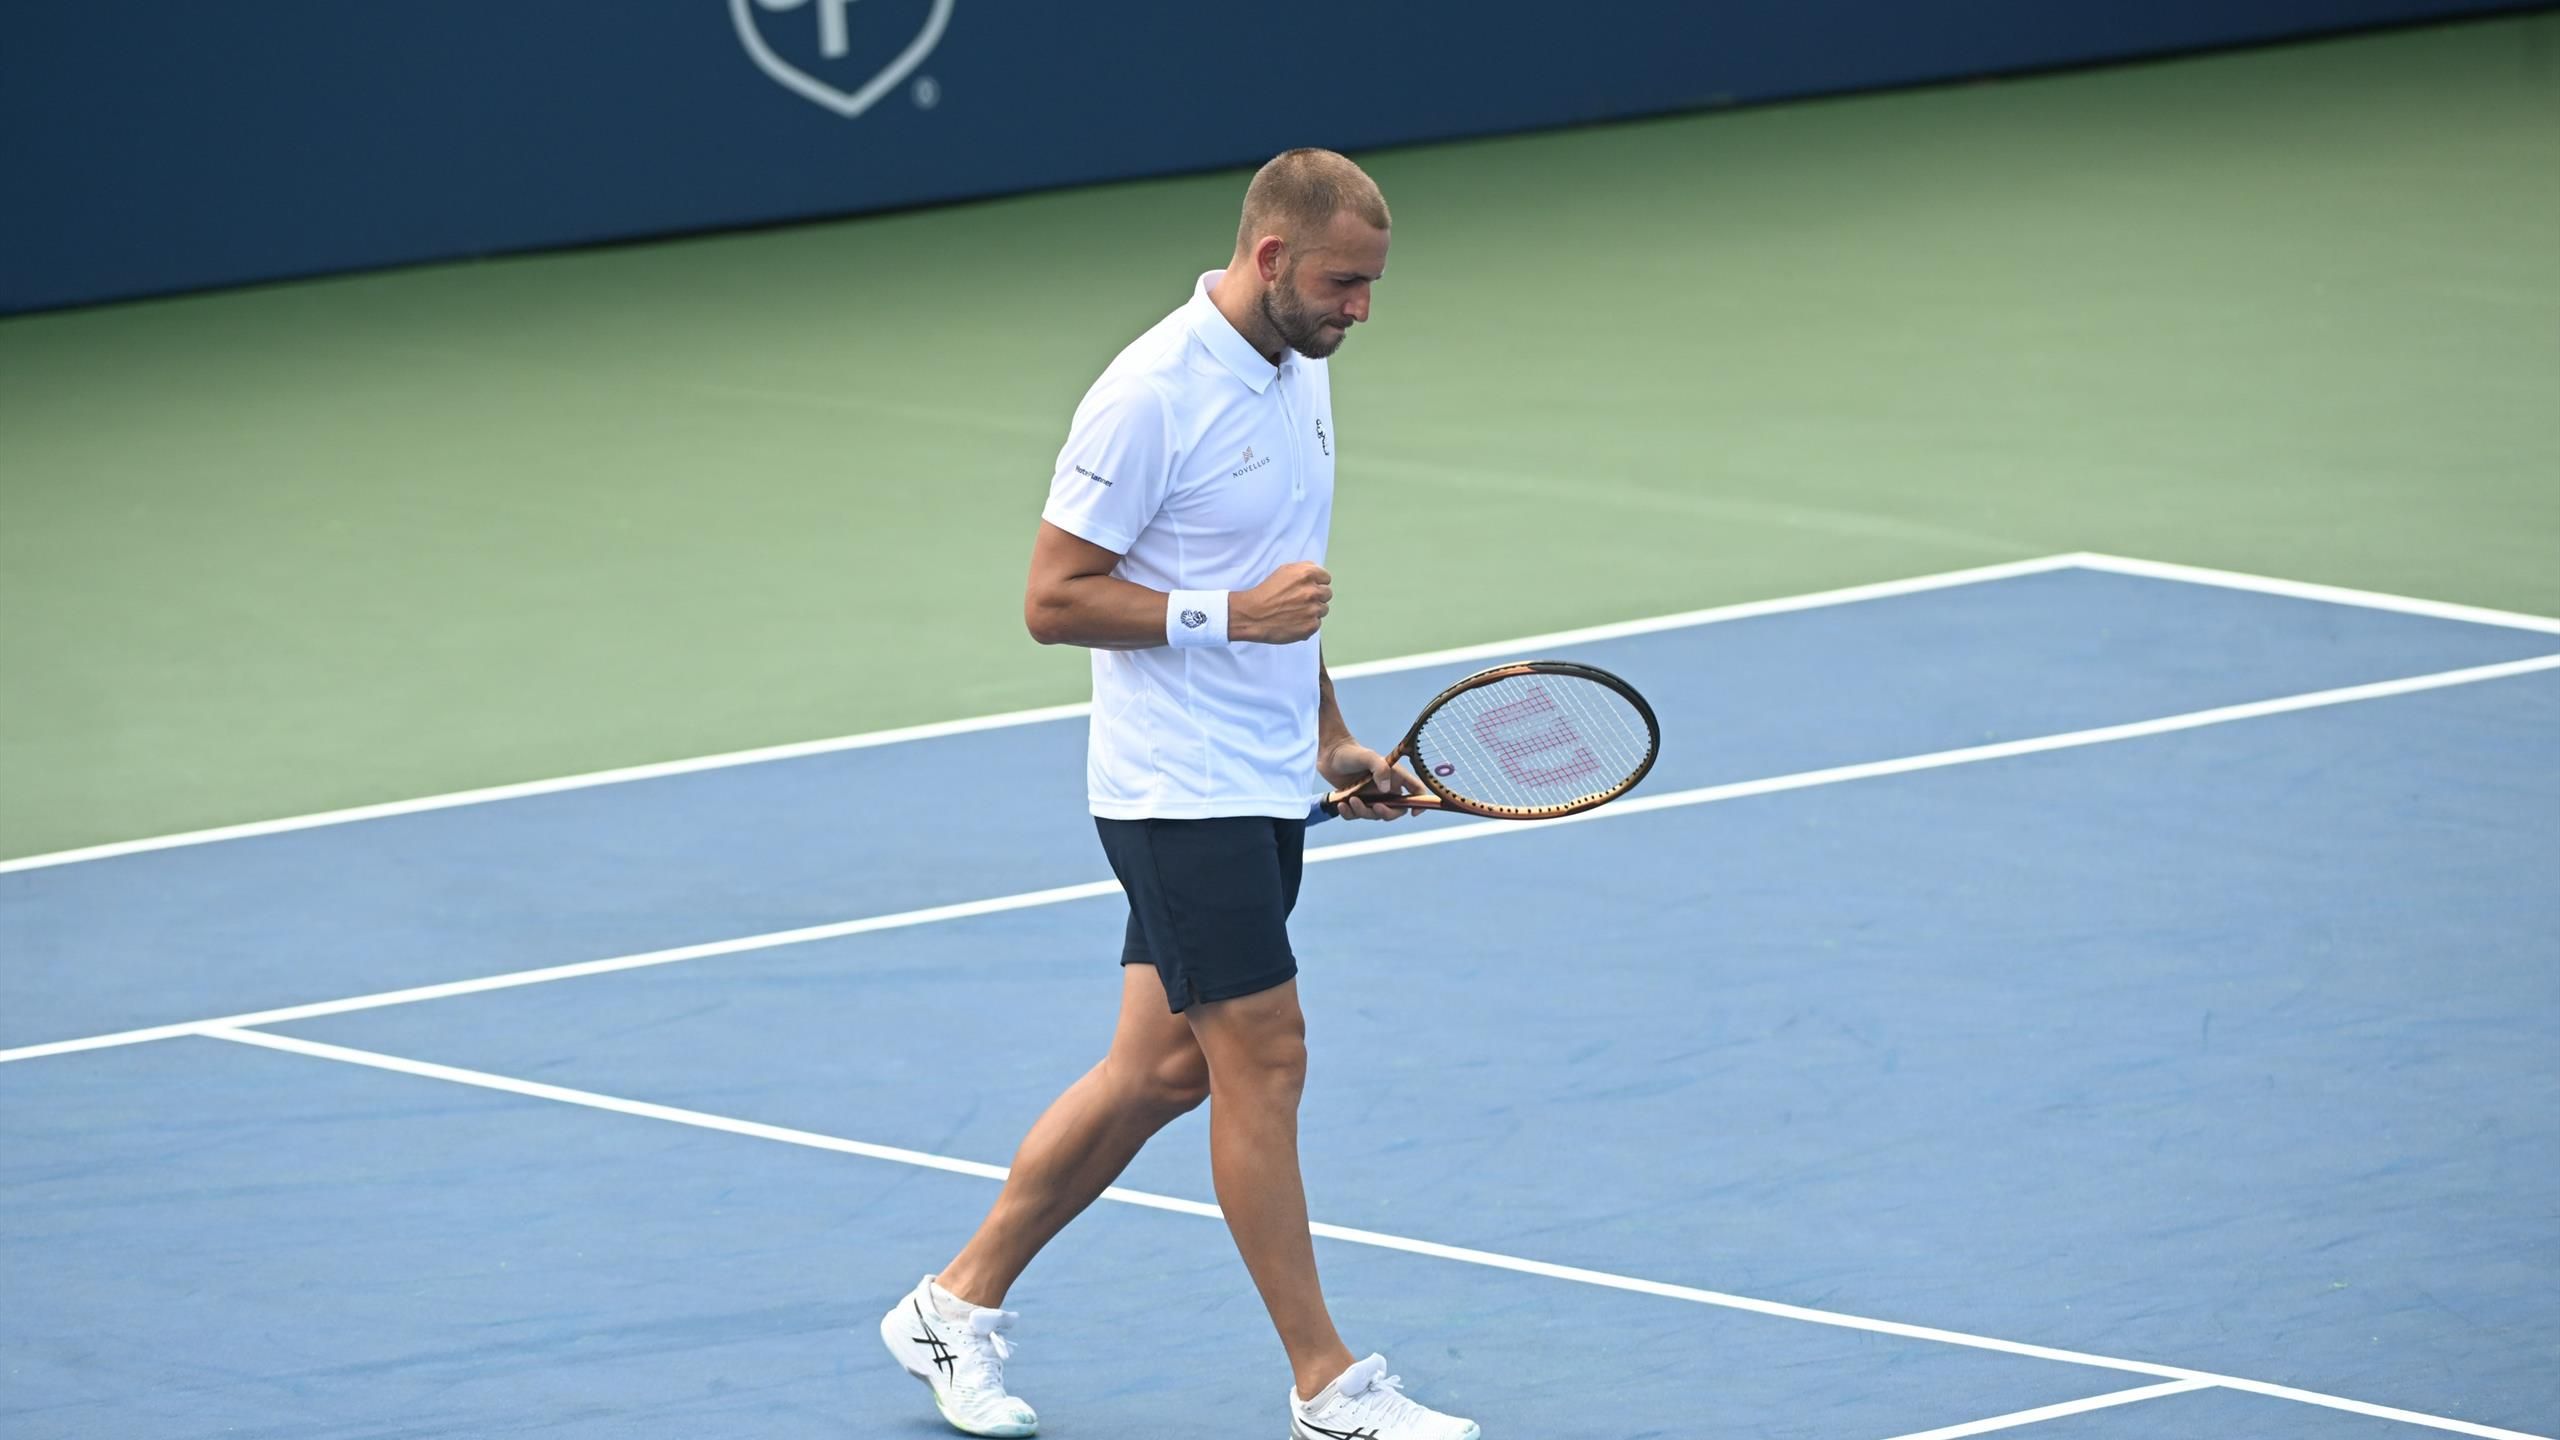 Dan Evans stuns Frances Tiafoe to reach Citi Open semis as Andy Murrays defeat is interrupted by climate protestors